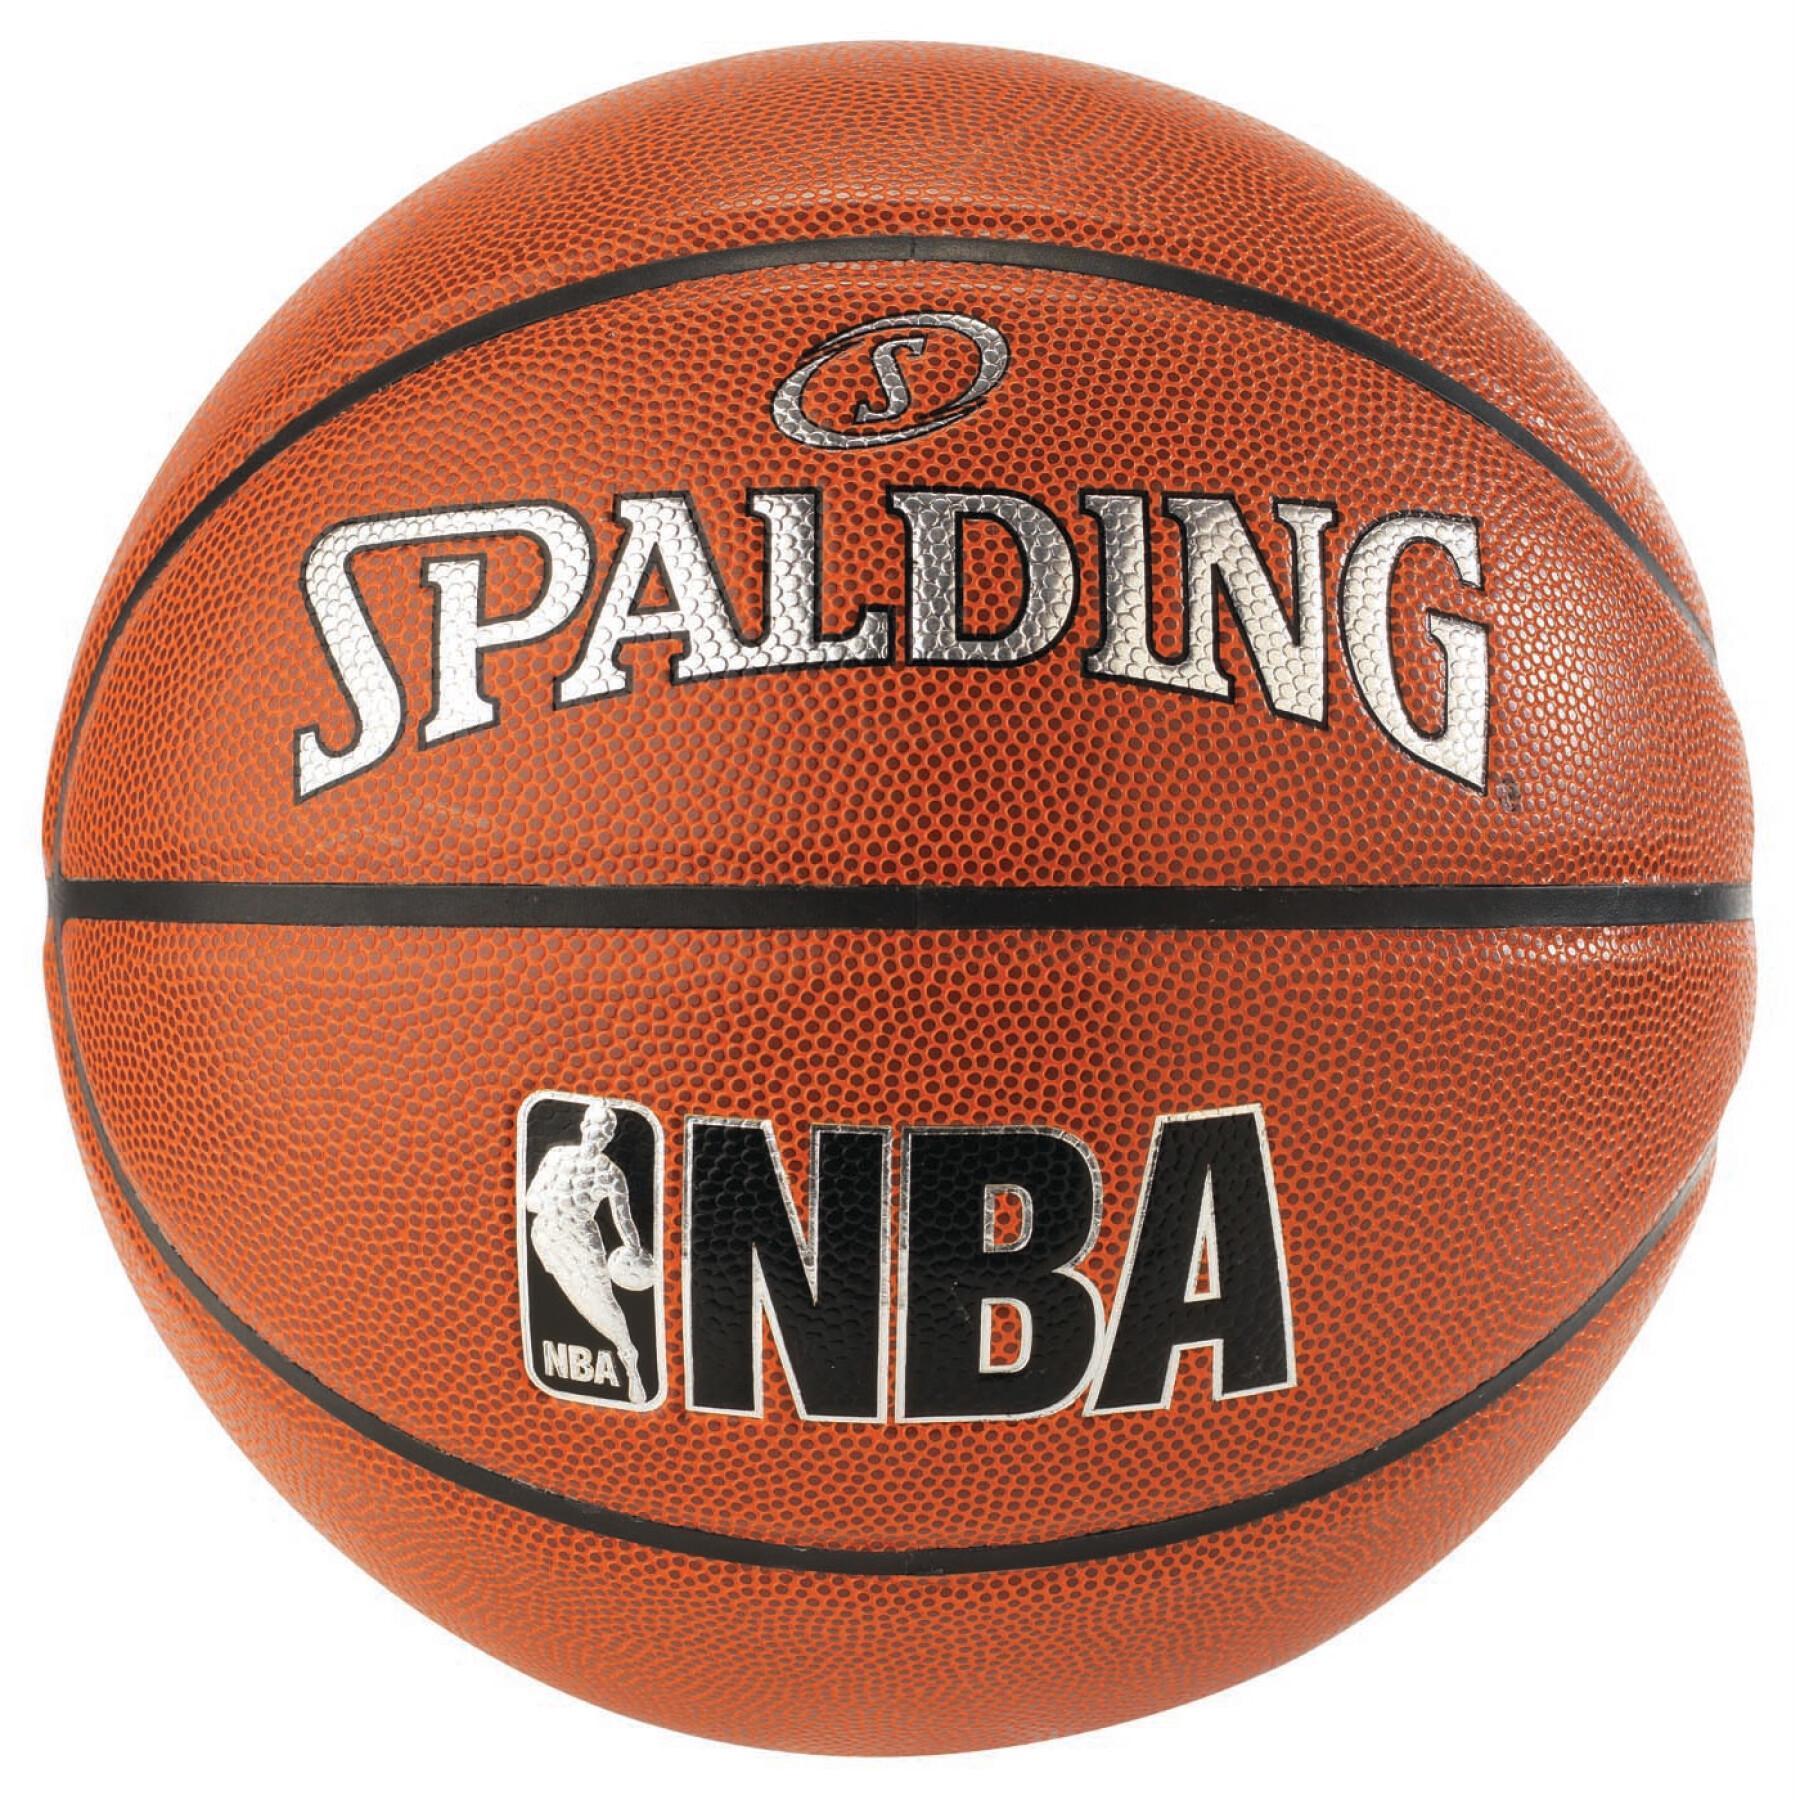 Children's ball Spalding NBA In/Out